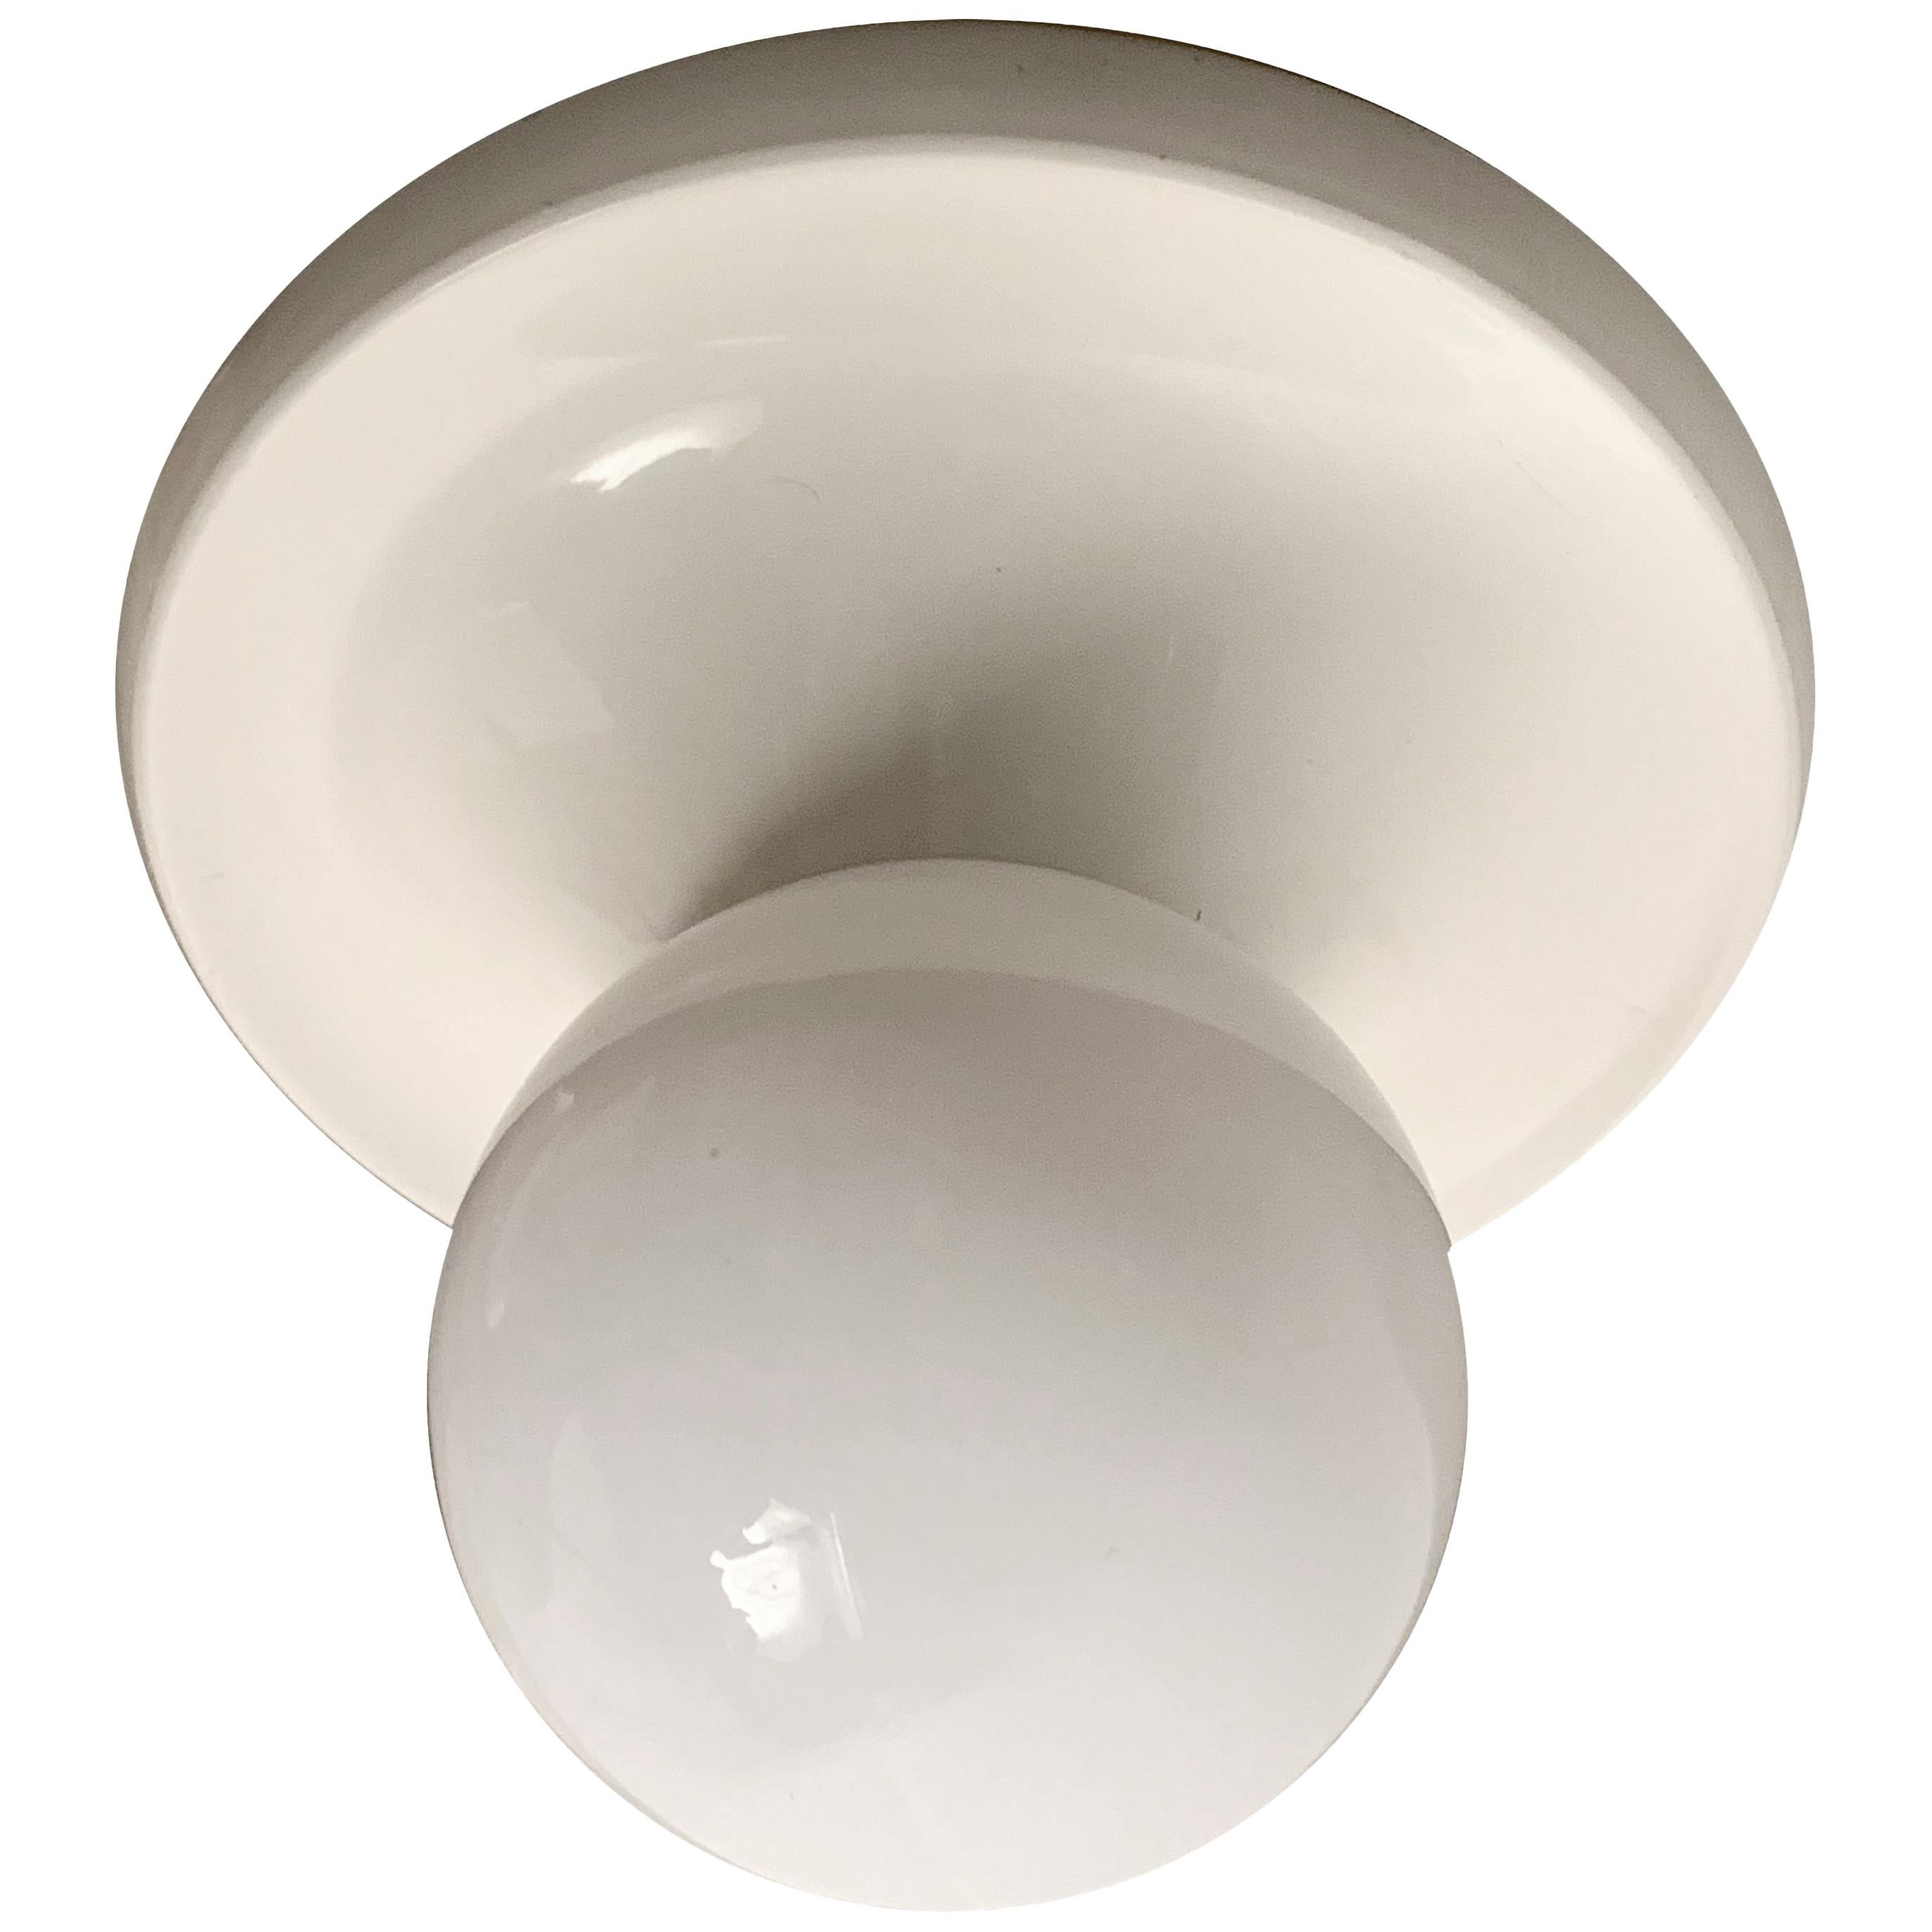  "Light Ball" by Castiglioni for Flos, wall or ceiling lamp. White Italy 1960s